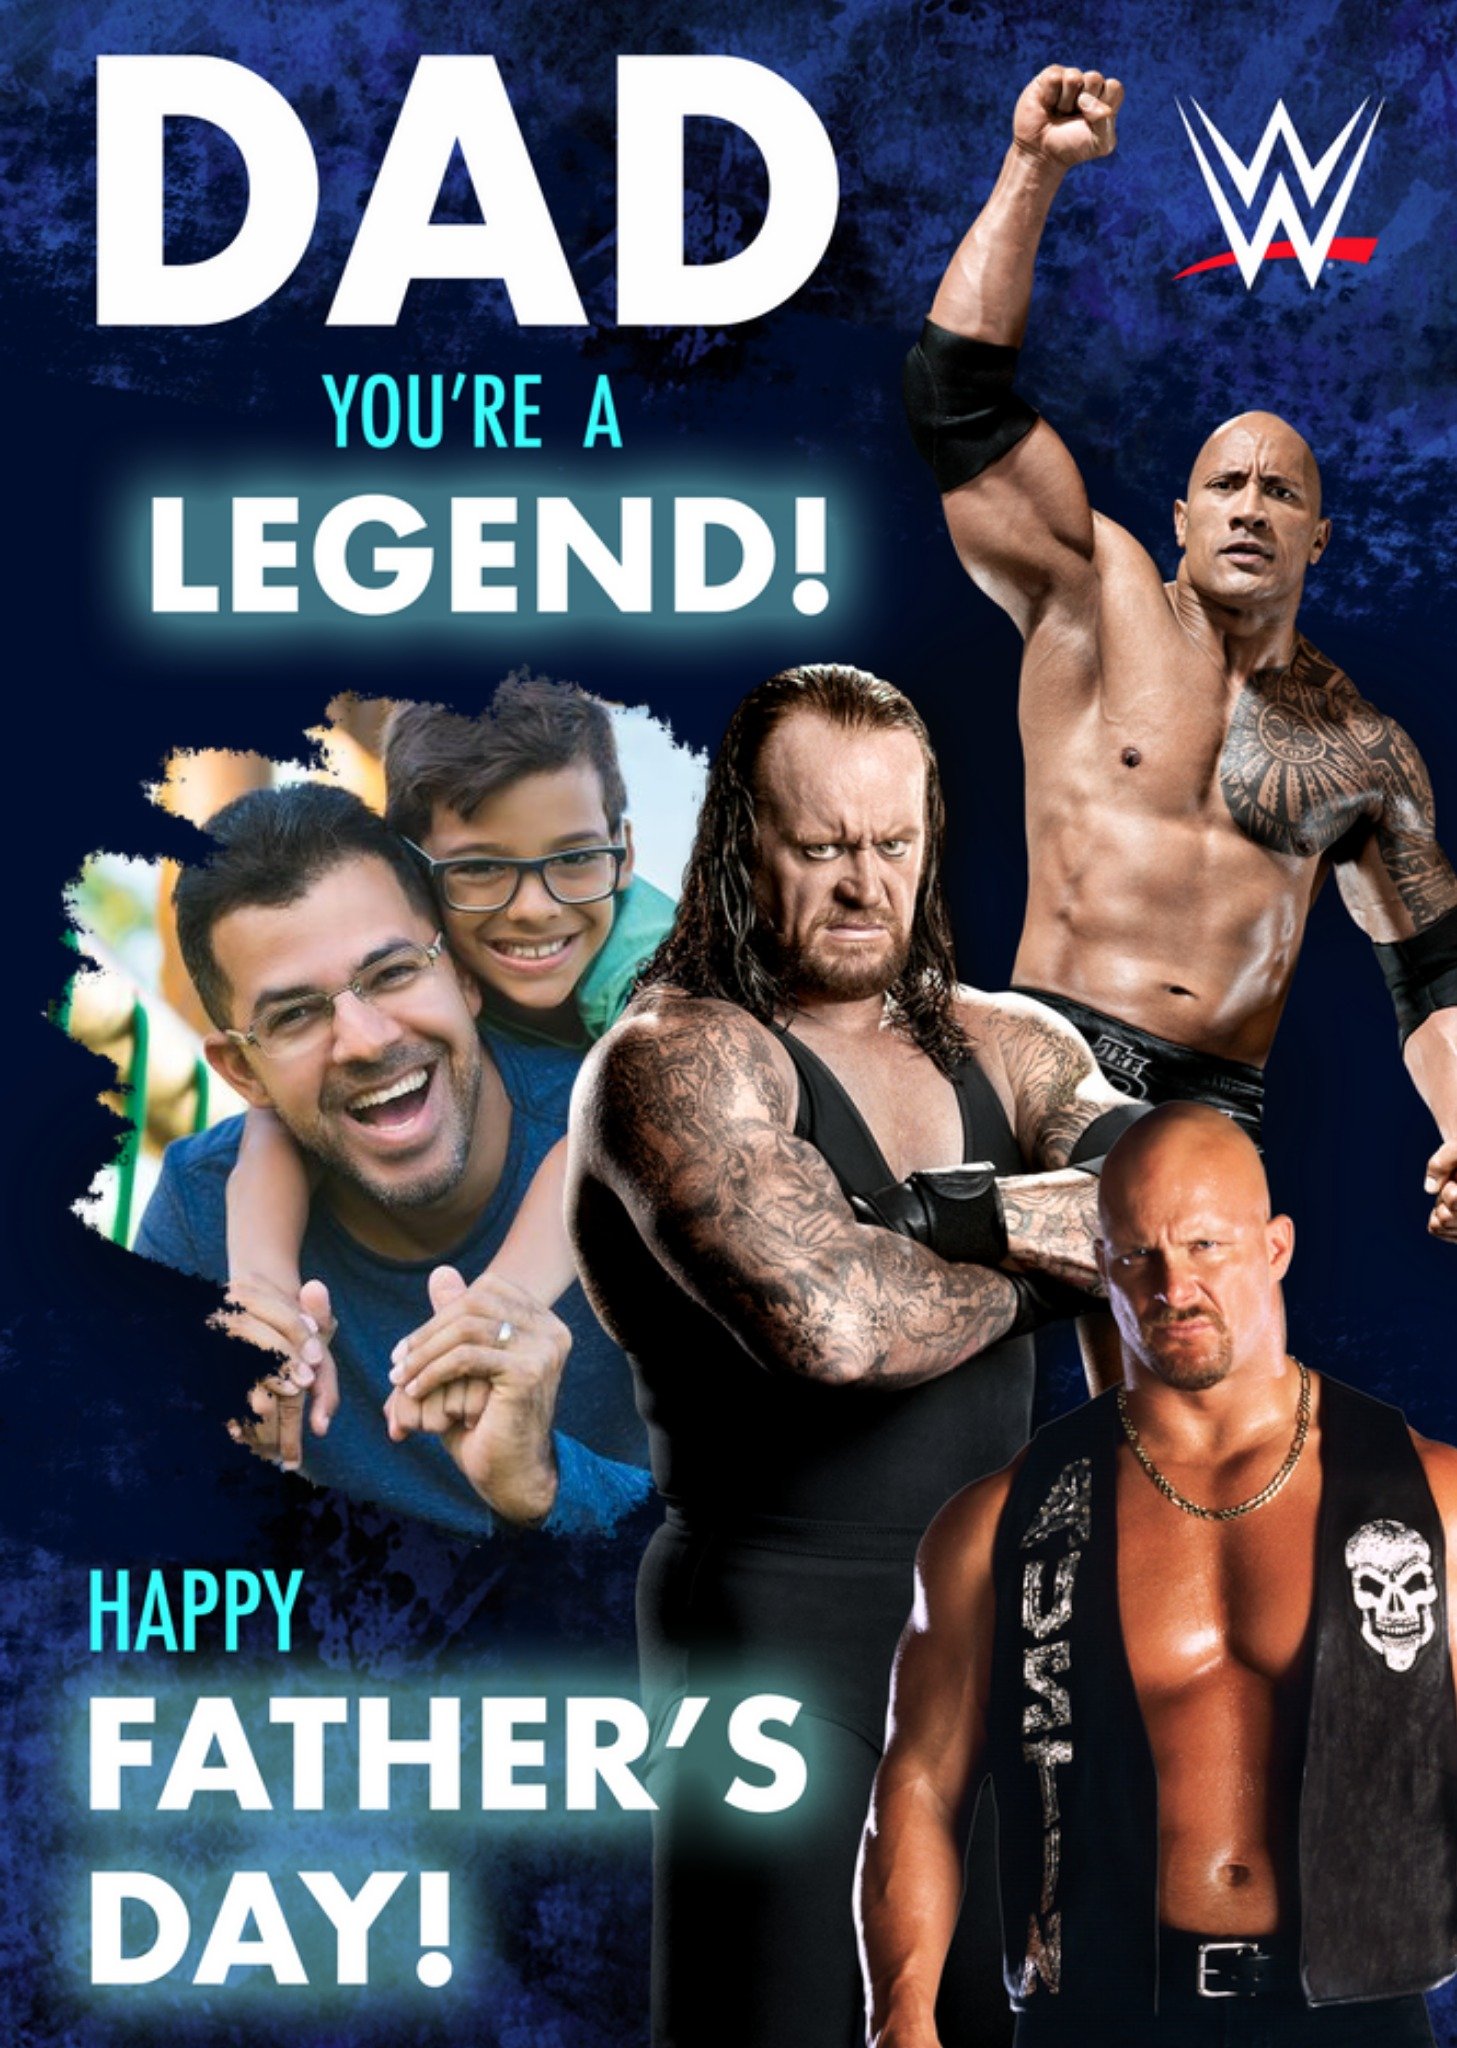 Wwe Dad You Are A Legend Photo Upload Card, Large